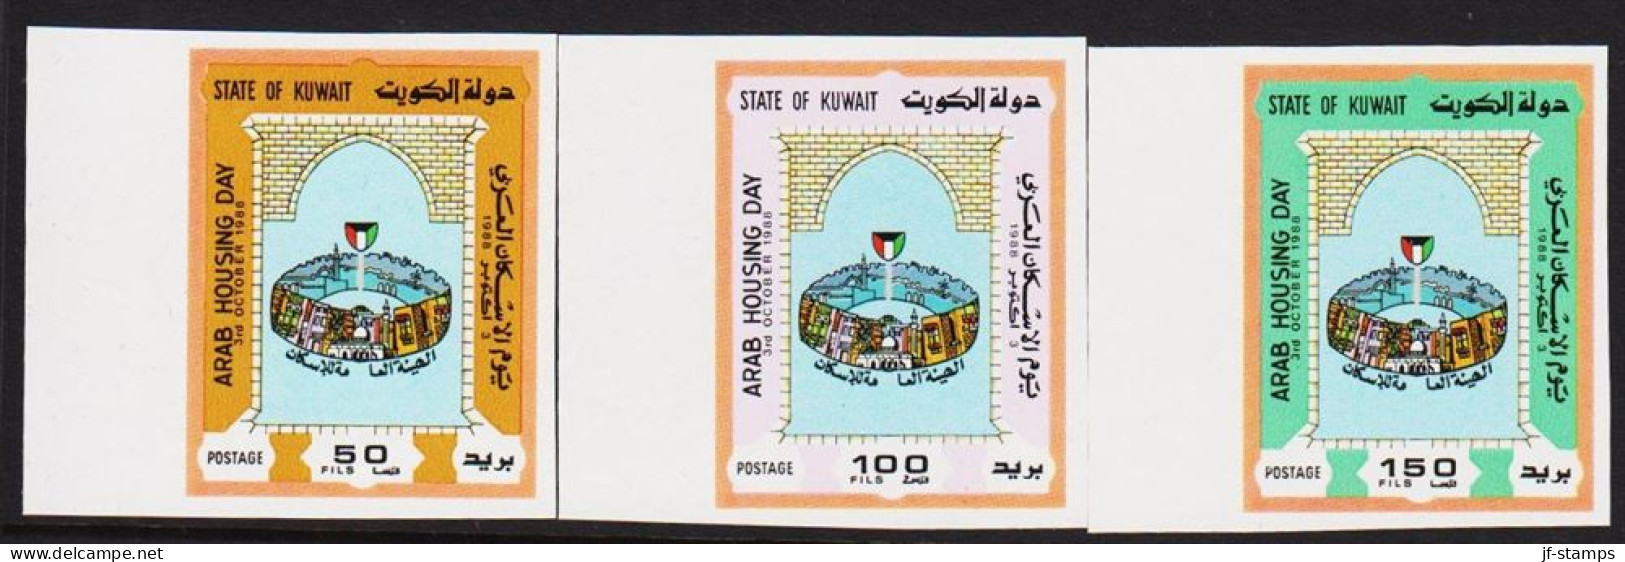 1988. KUWAIT. ARAB HOUSING DAY In Complete Set IMPERFORATE. Never Hinged. Unusual.  (Michel 1170-1172 U) - JF544553 - Kuwait